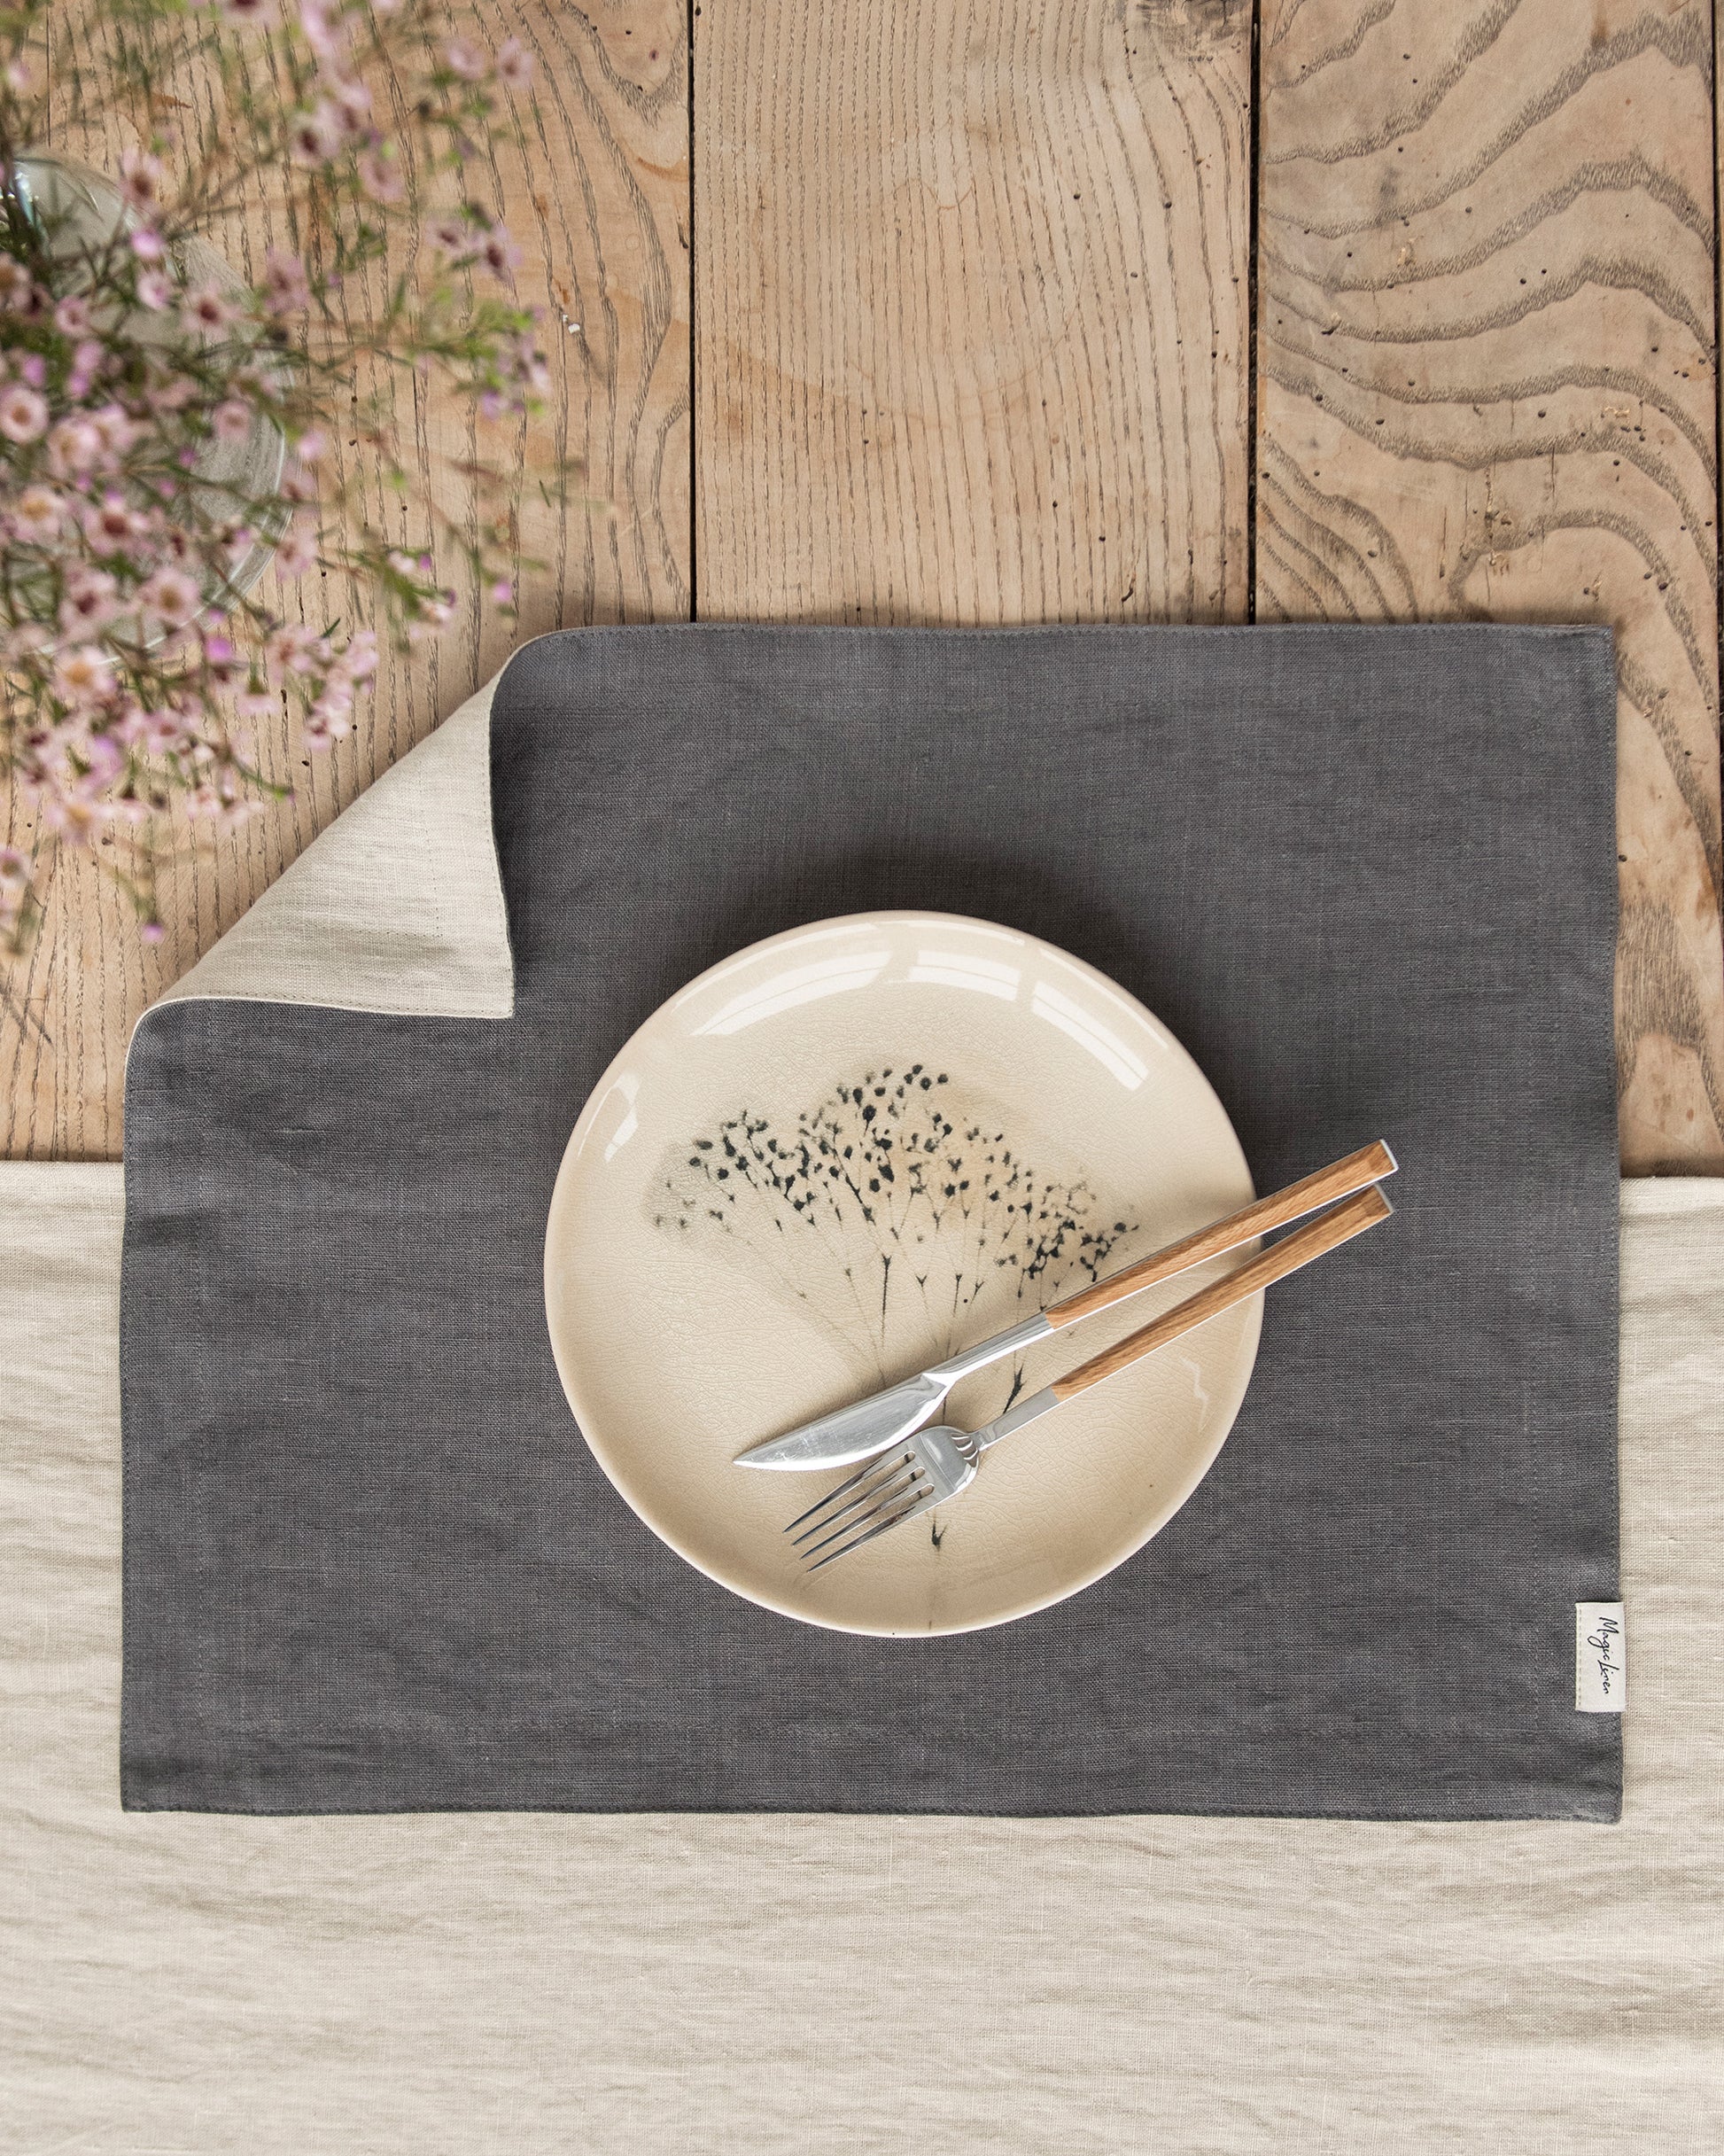 Double layer linen placemat set of 2 in Charcoal gray - MagicLinen